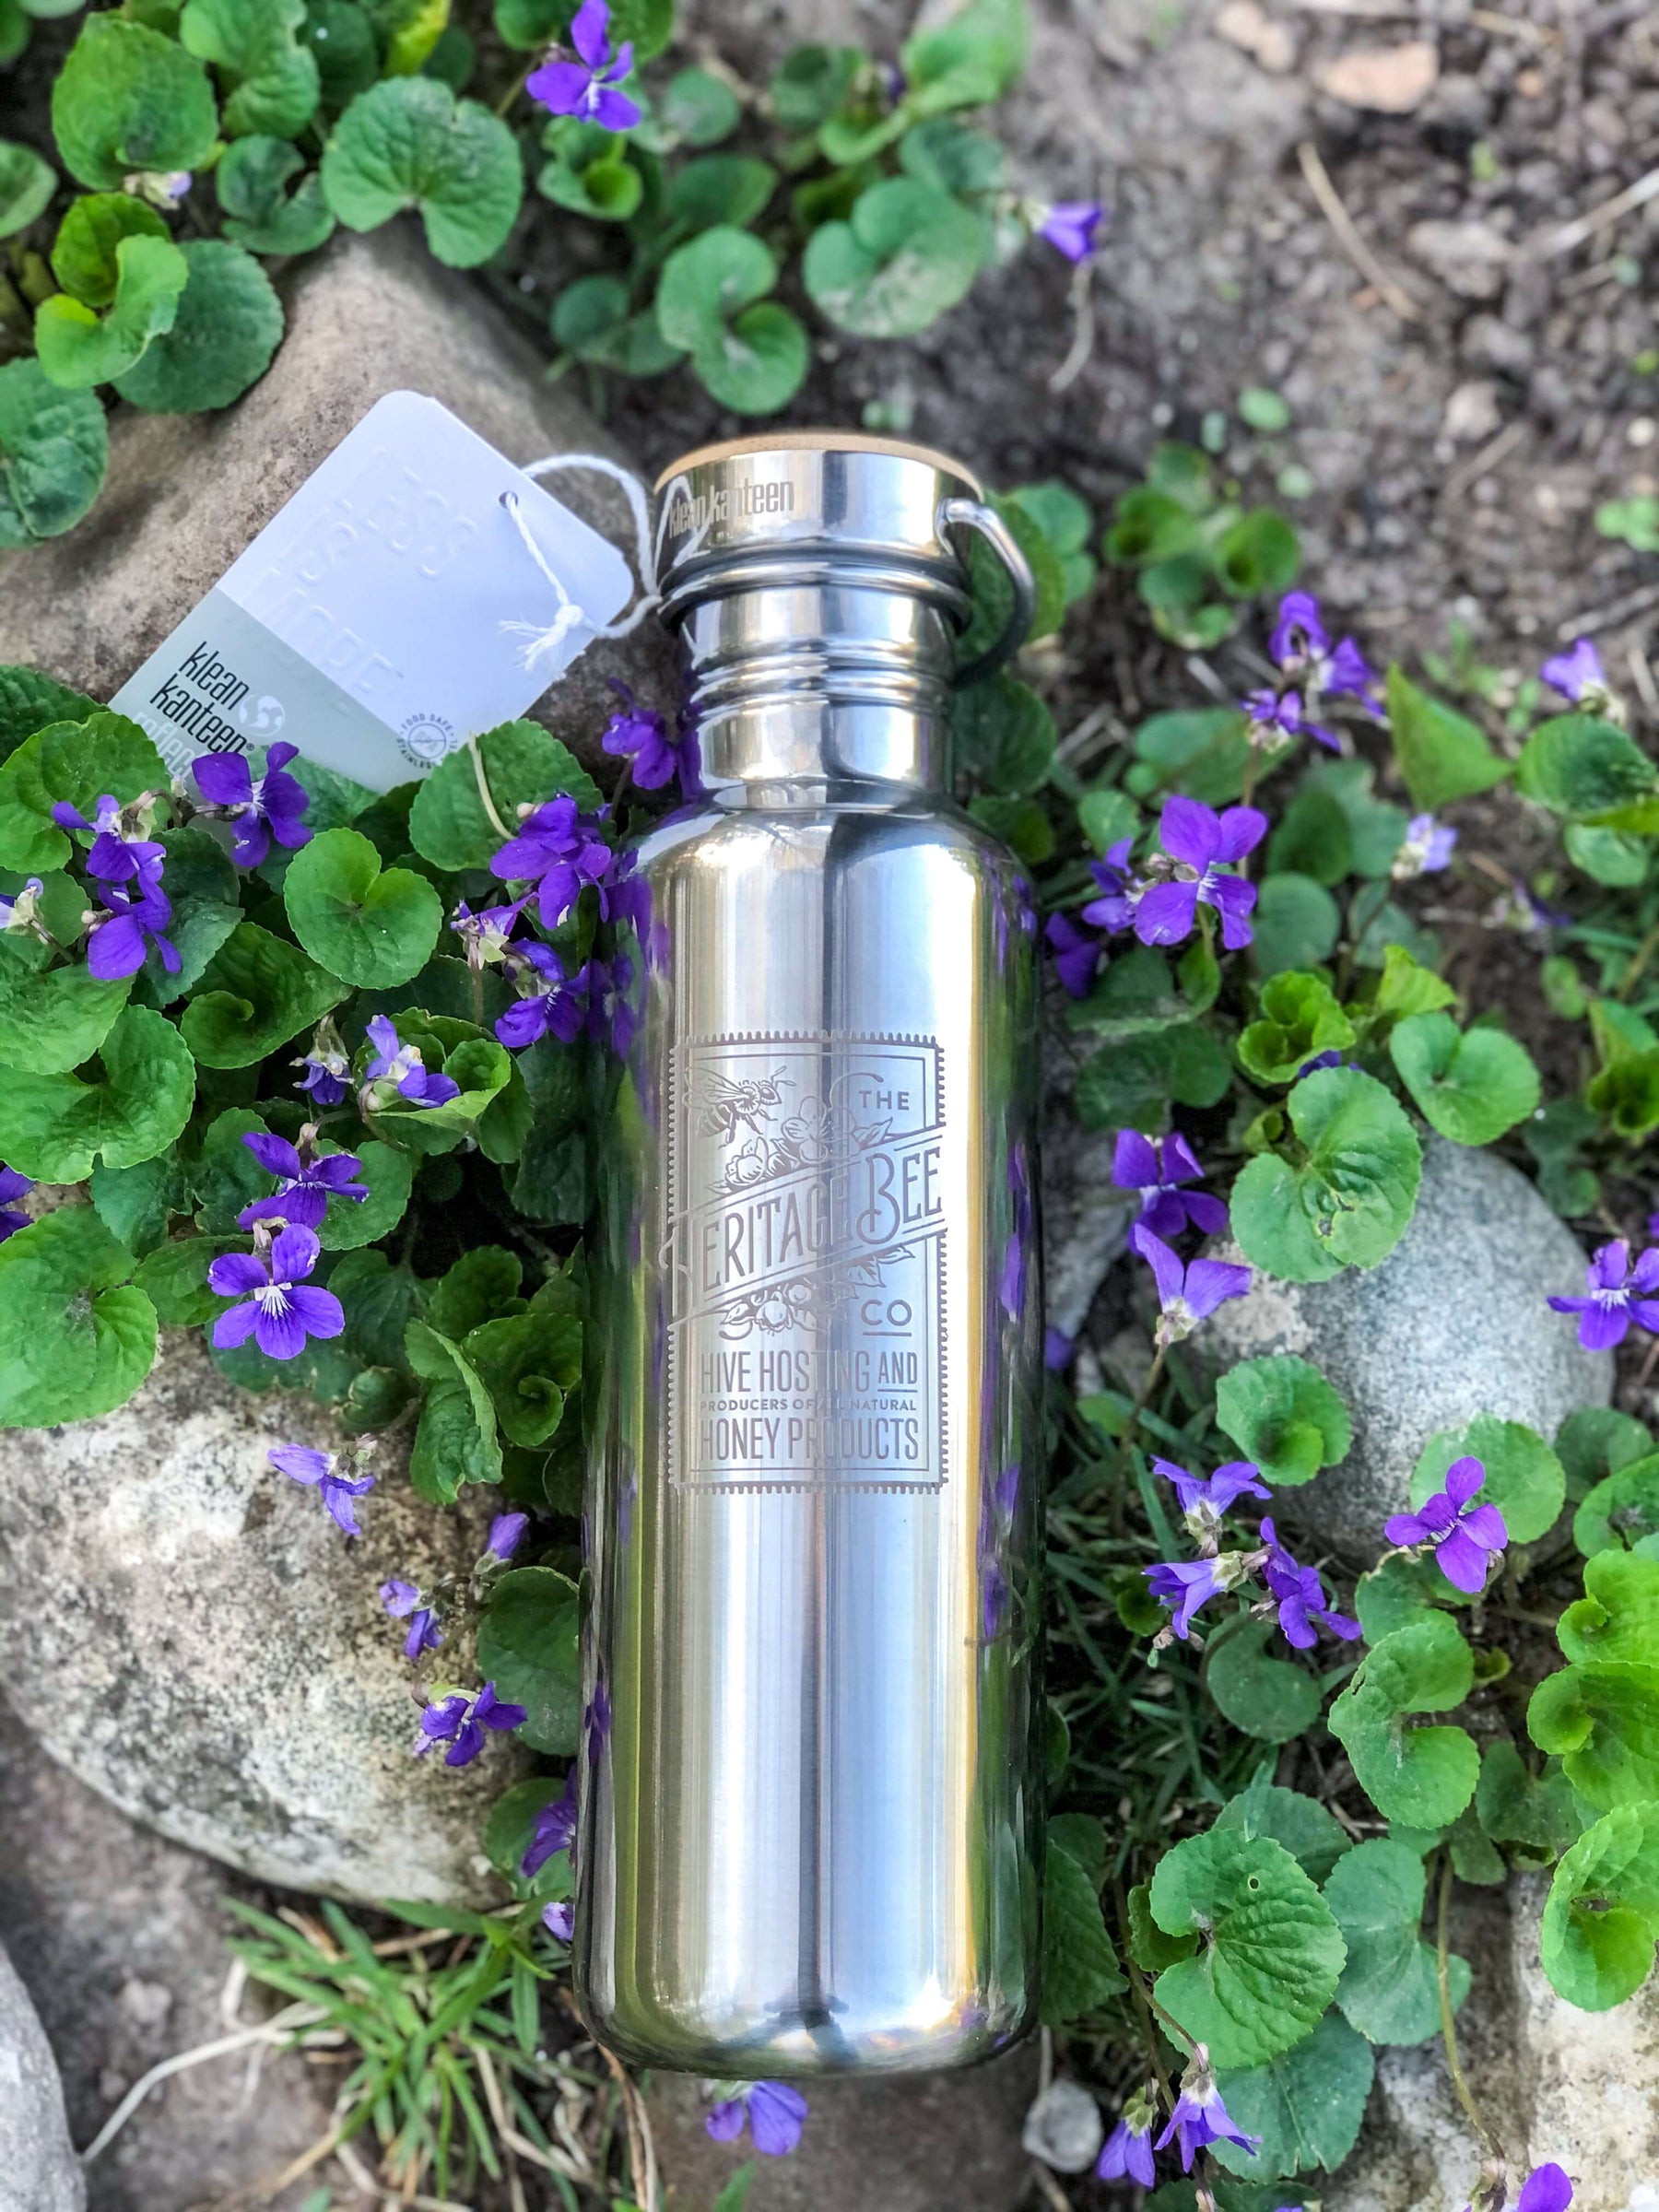 Klean Kanteen Reflect 27 oz. Bottle with Bamboo Cap - Brushed Stainless